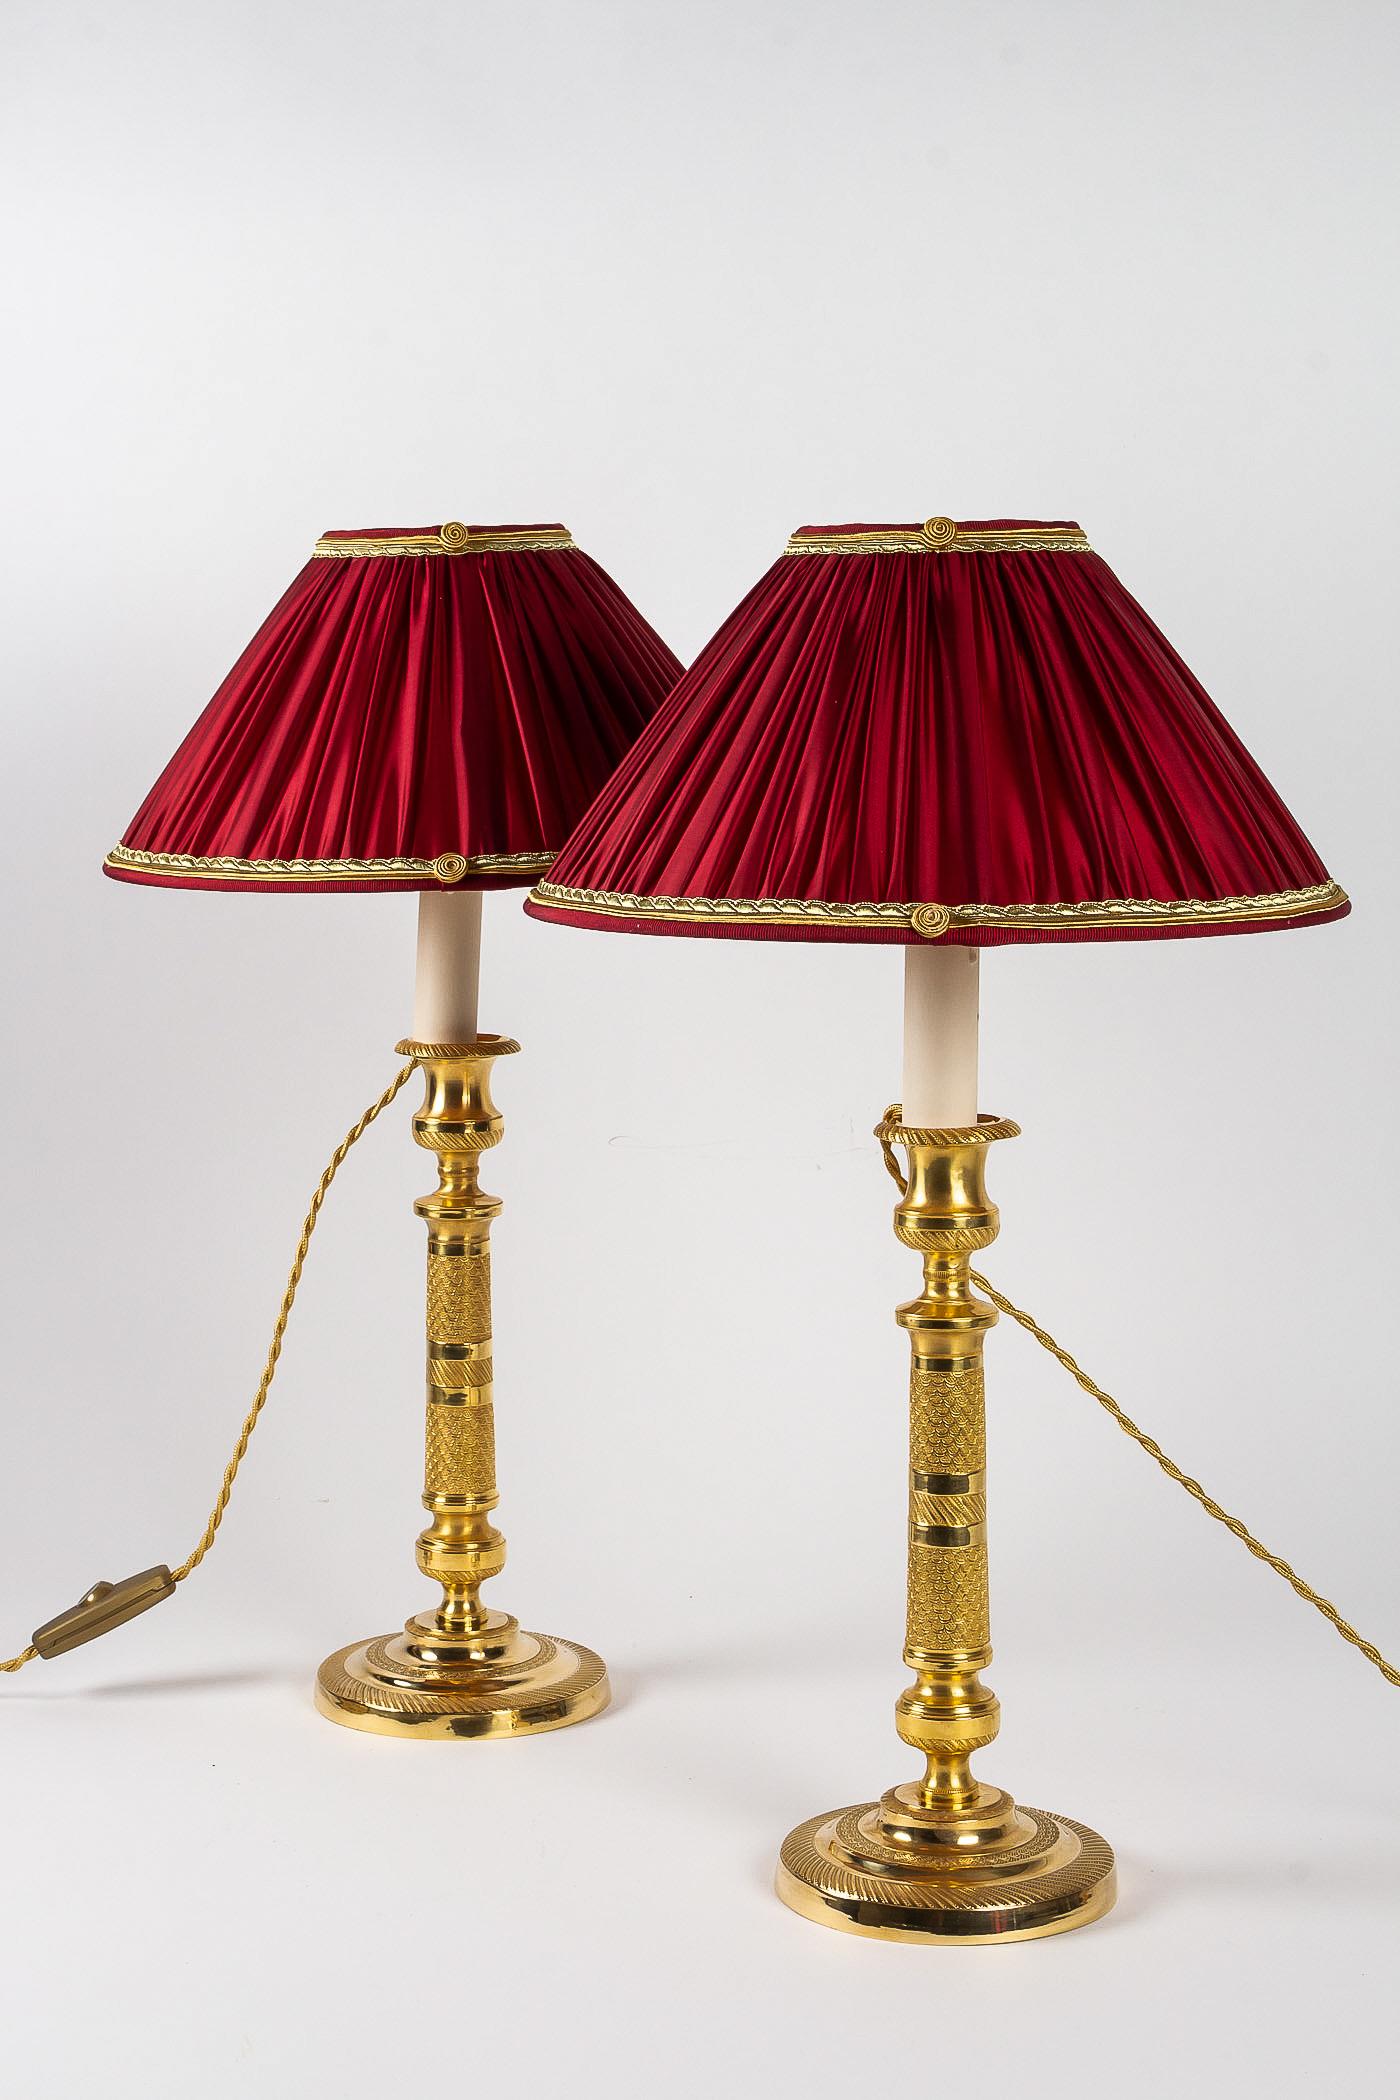 French Empire Period, Pair of Ormolu Candlesticks Converted in Table Lamps 2